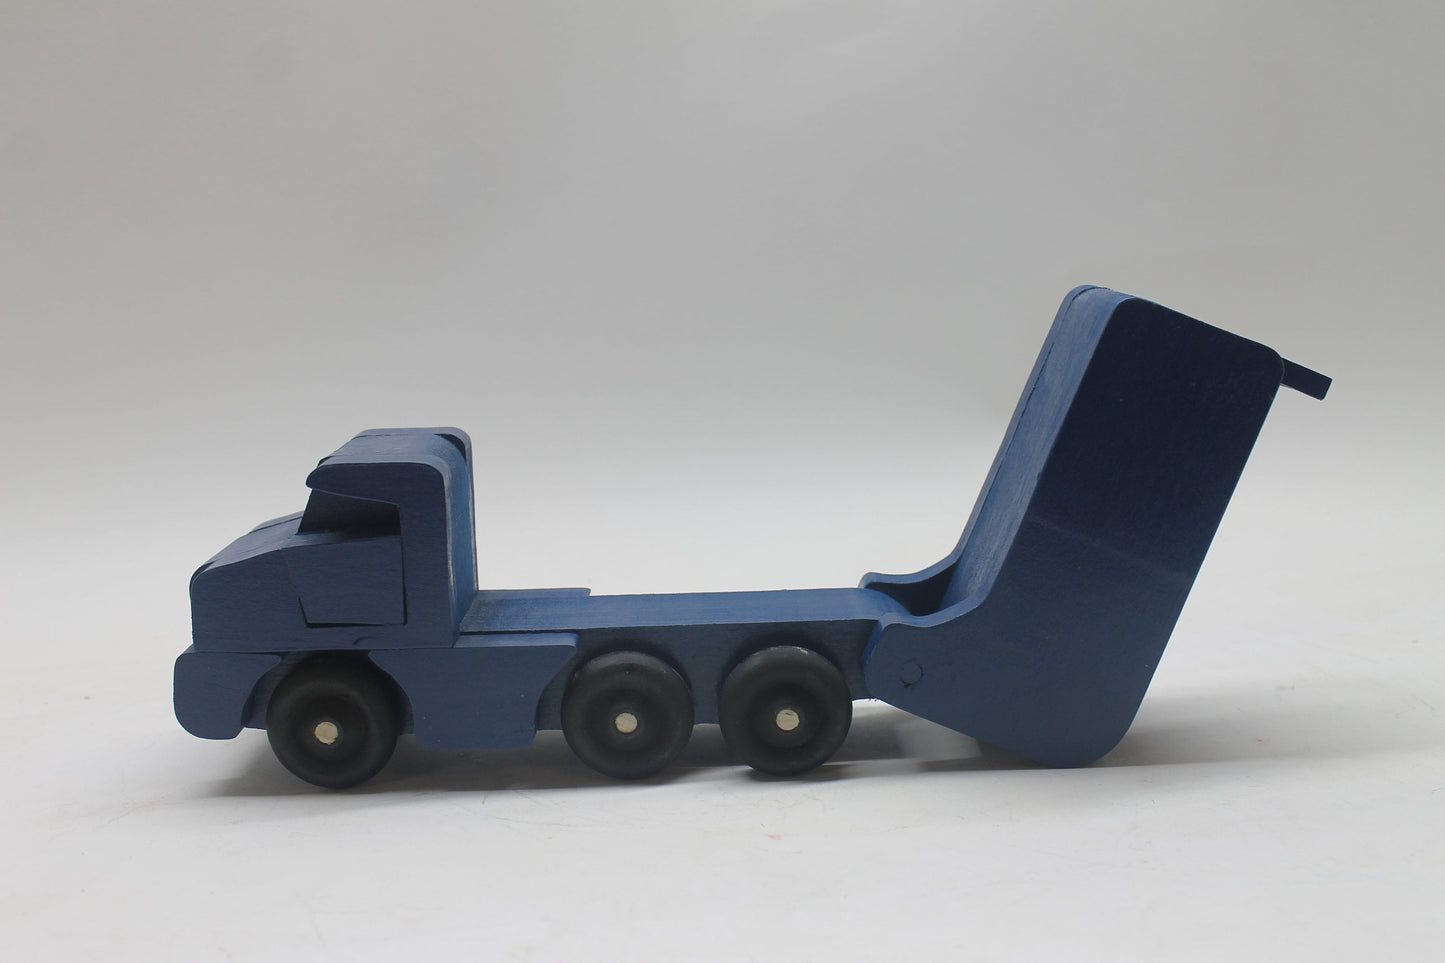 Toy wooden dump truck. What toy truck is more fun for kids than a dump truck? This tilting bed truck comes in oak or a choice of colors